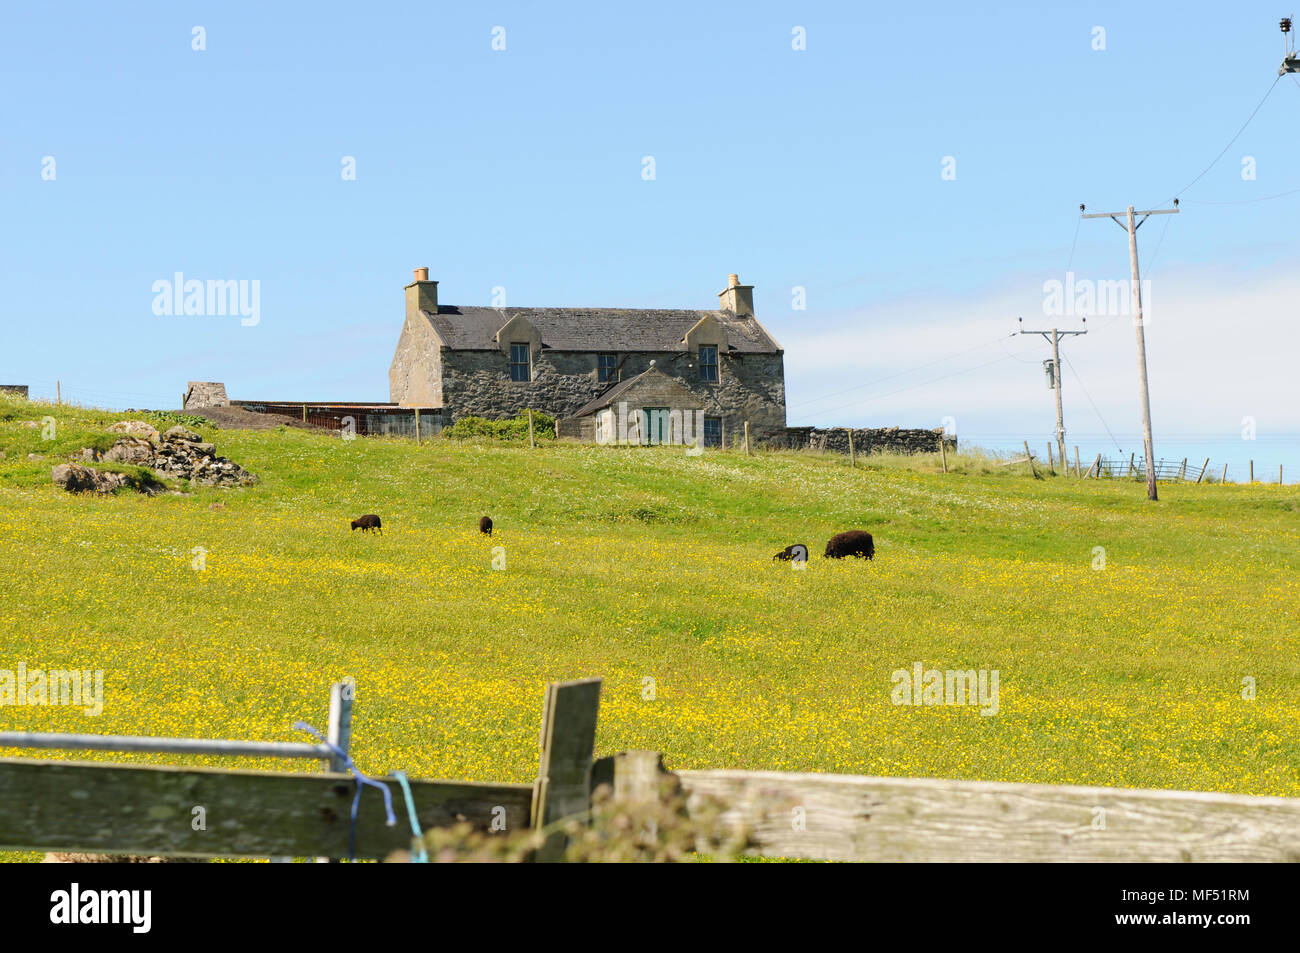 Field in Shetland covered in buttercups with sheep and an old derelict croft farm house Stock Photo